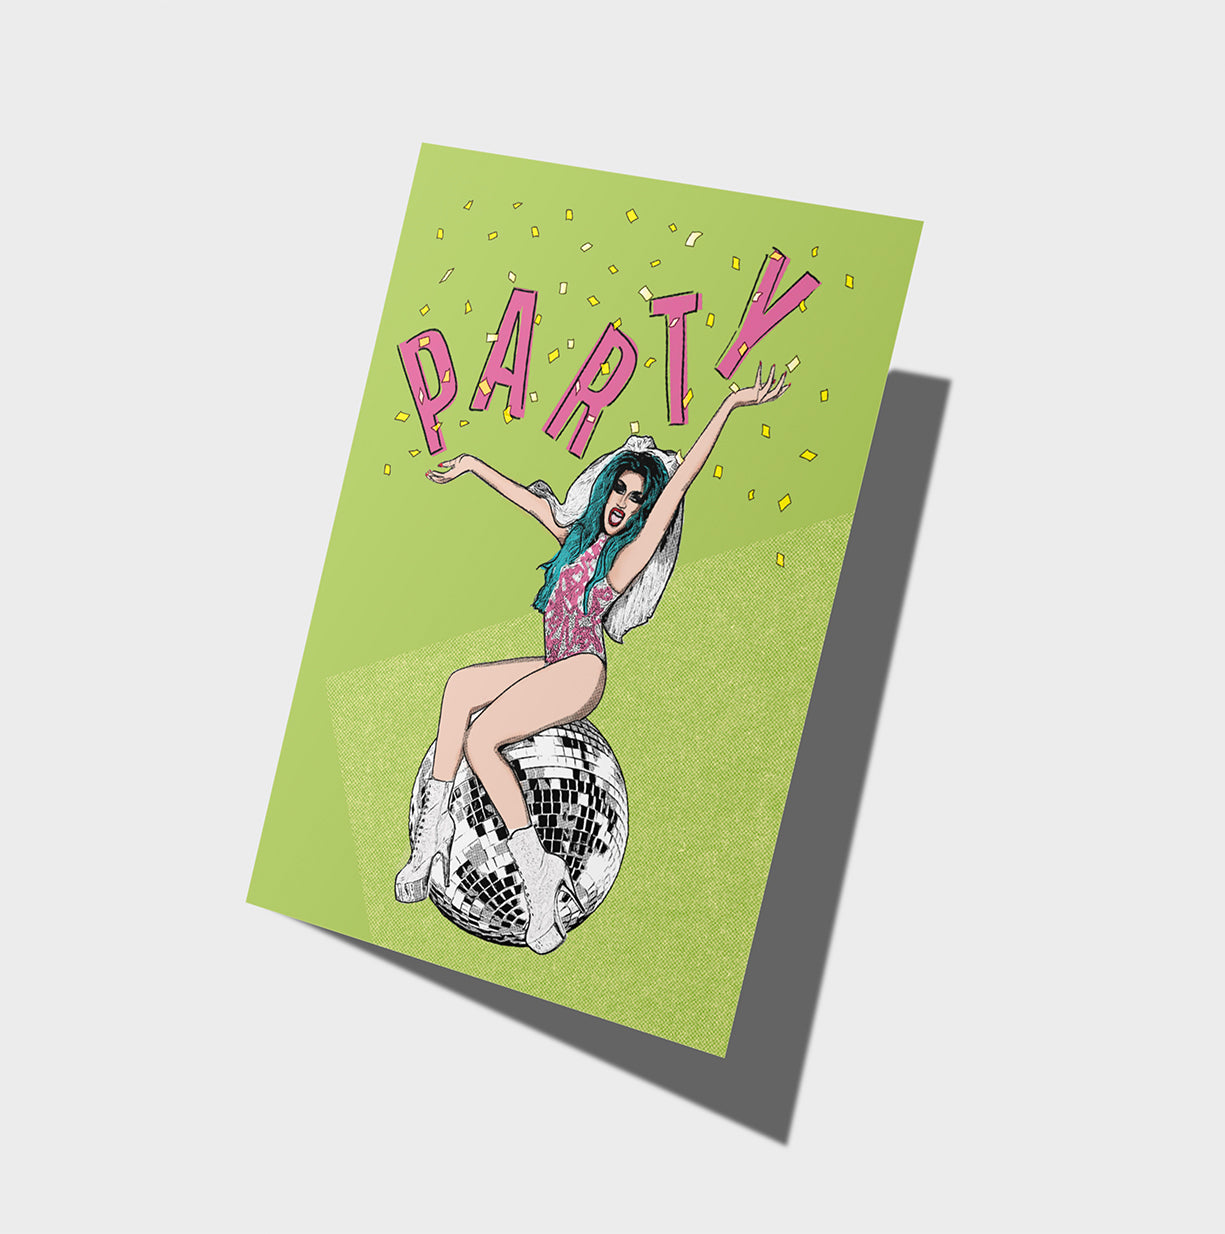 Adore Delano Party Card | Drag Queen Type | Illustration Card | RuPaul's Drag Race